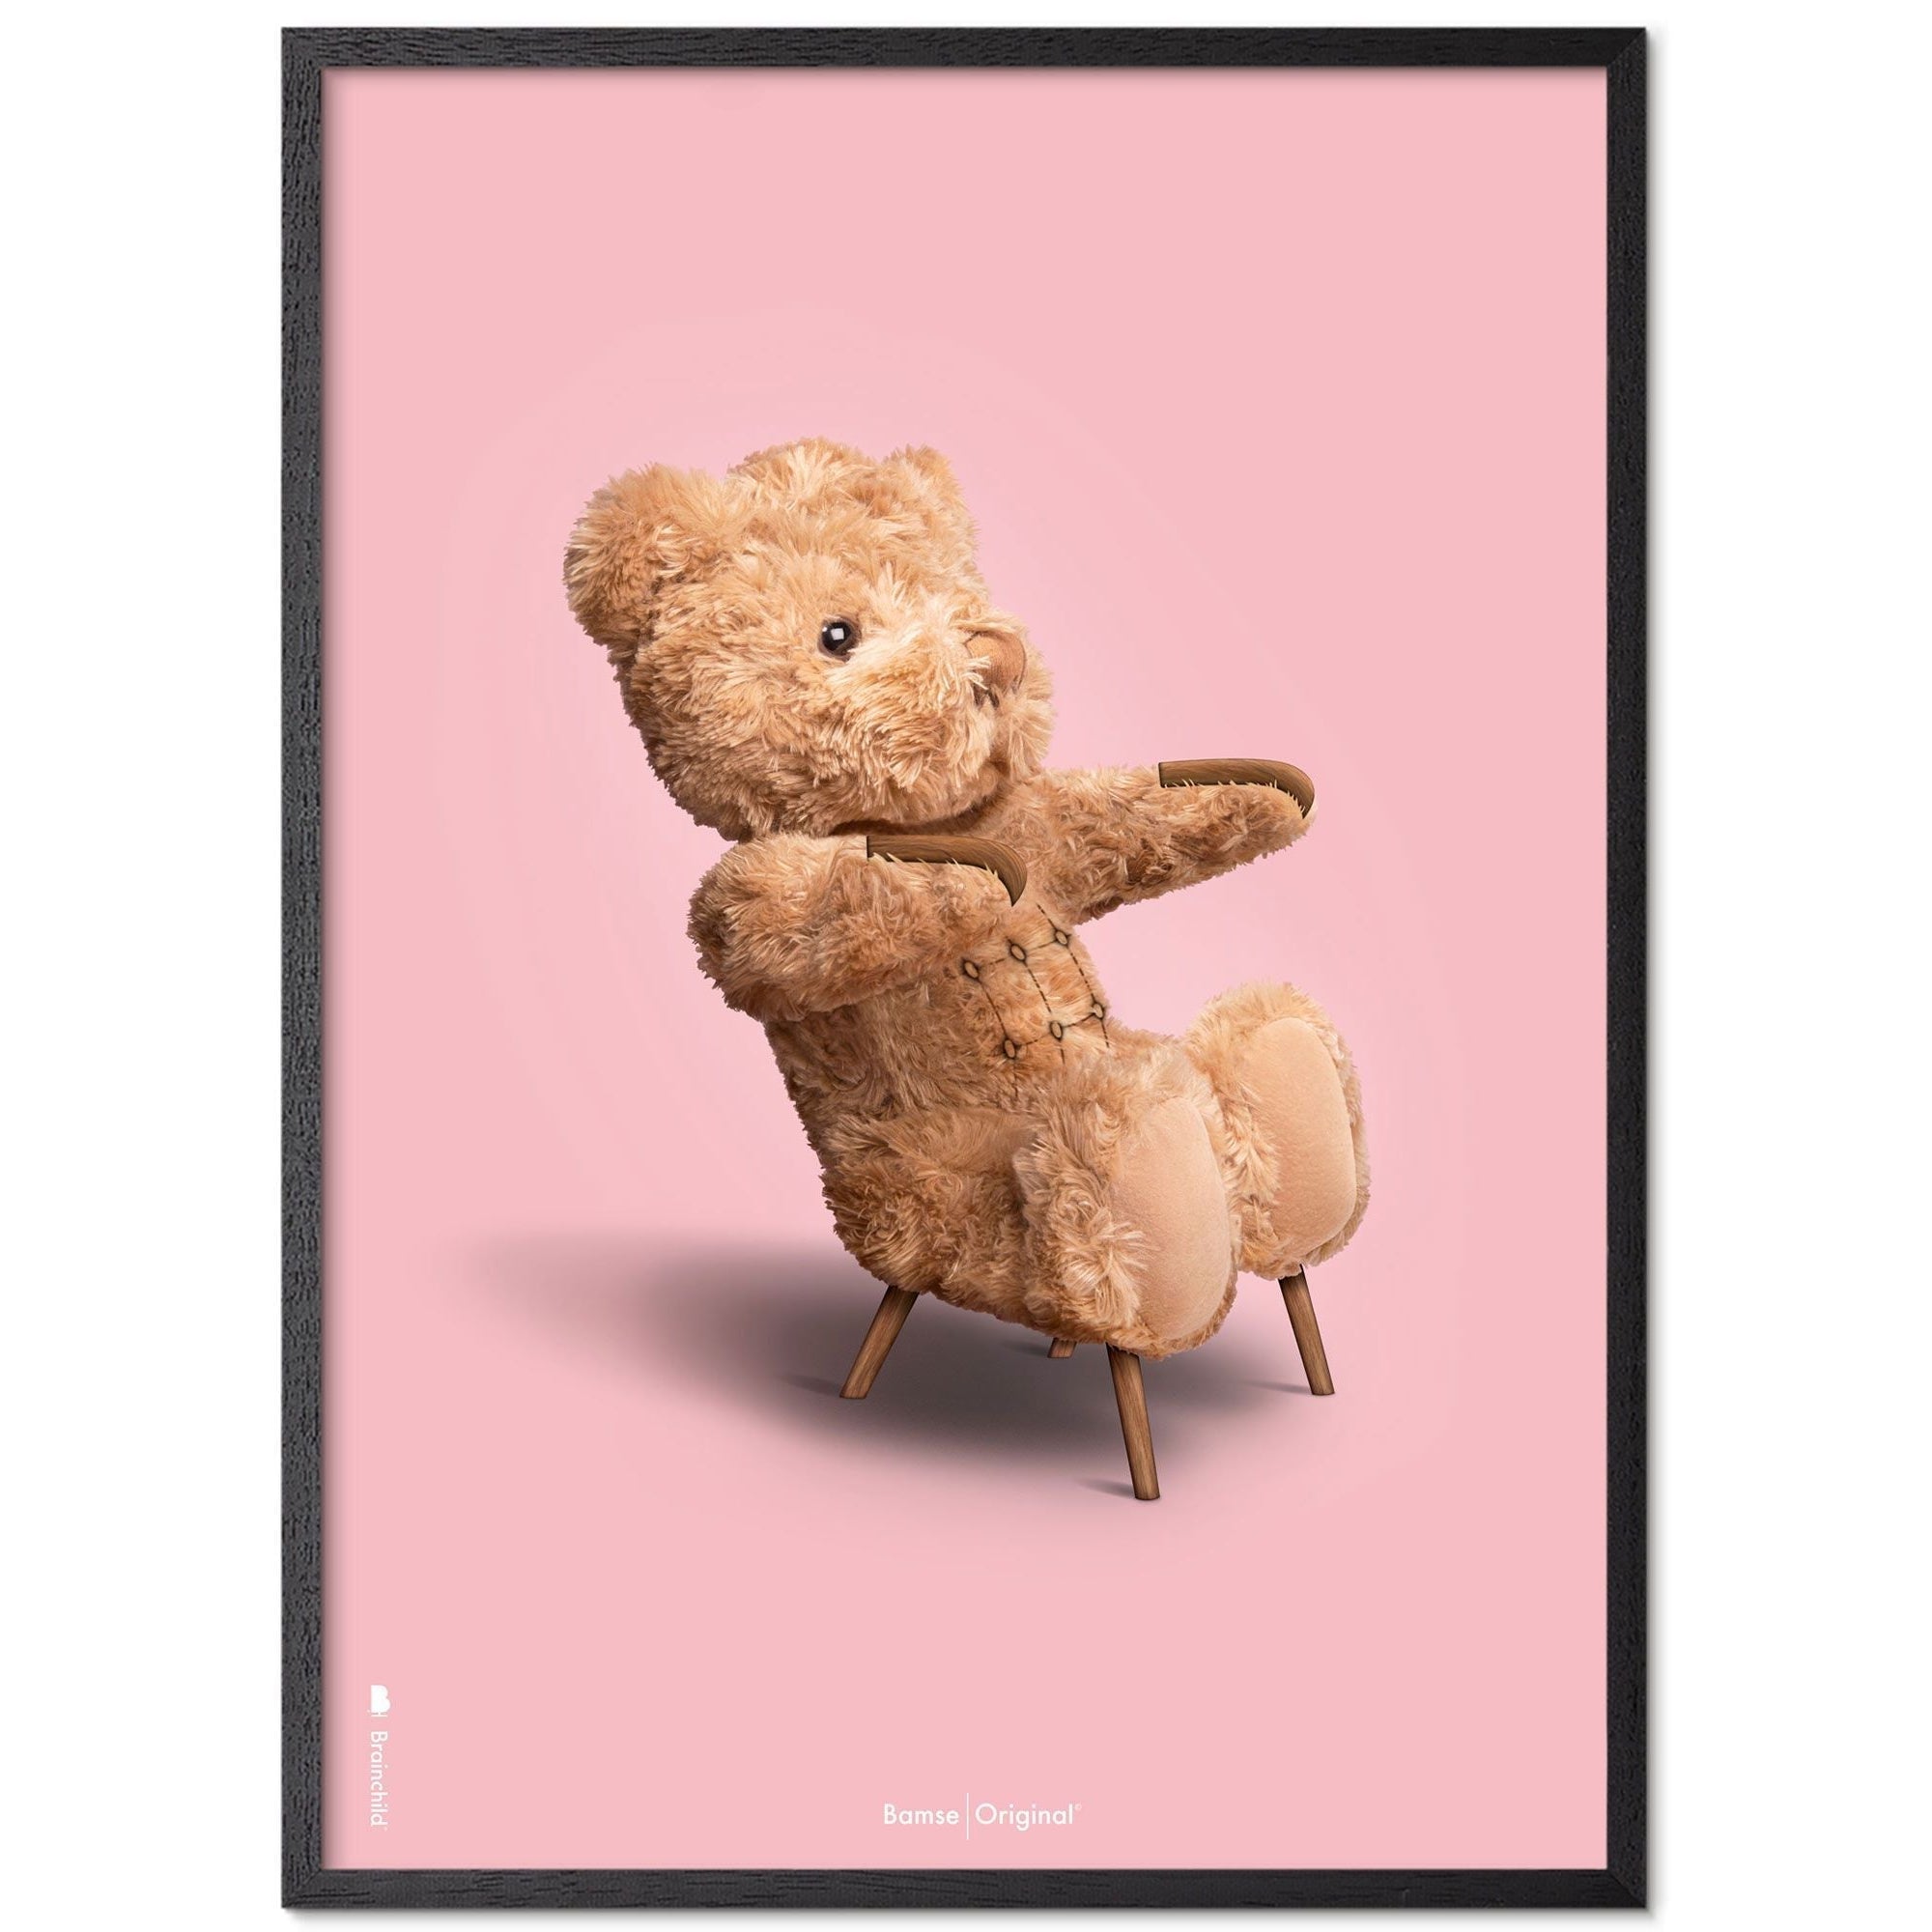 Brainchild Teddy Bear Classic Poster Frame Made Of Black Lacquered Wood 50x70 Cm, Pink Background